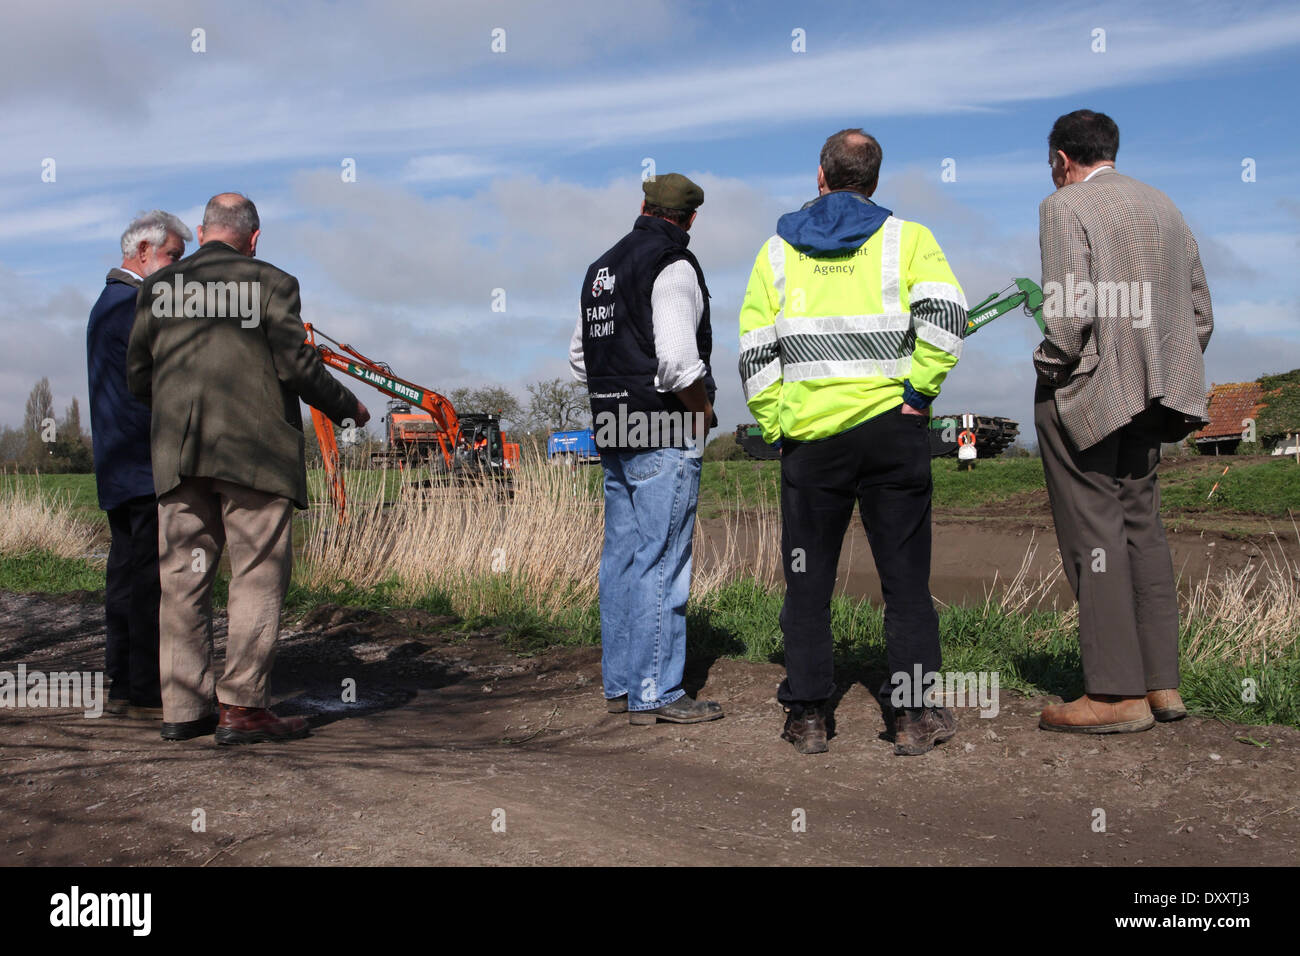 Moorland, near Burrowbridge, Somerset, UK. 1st April 2014. Environment Agency managers talk with local farmers and residents about Day 2 of the dredging operation along the banks of the River Parrett on the Somerset Levels. Todays dredging was hampered by the use of only one dumper truck to remove the dredged silt which meant a lot of time was wasted which did not impress the locals. Stock Photo